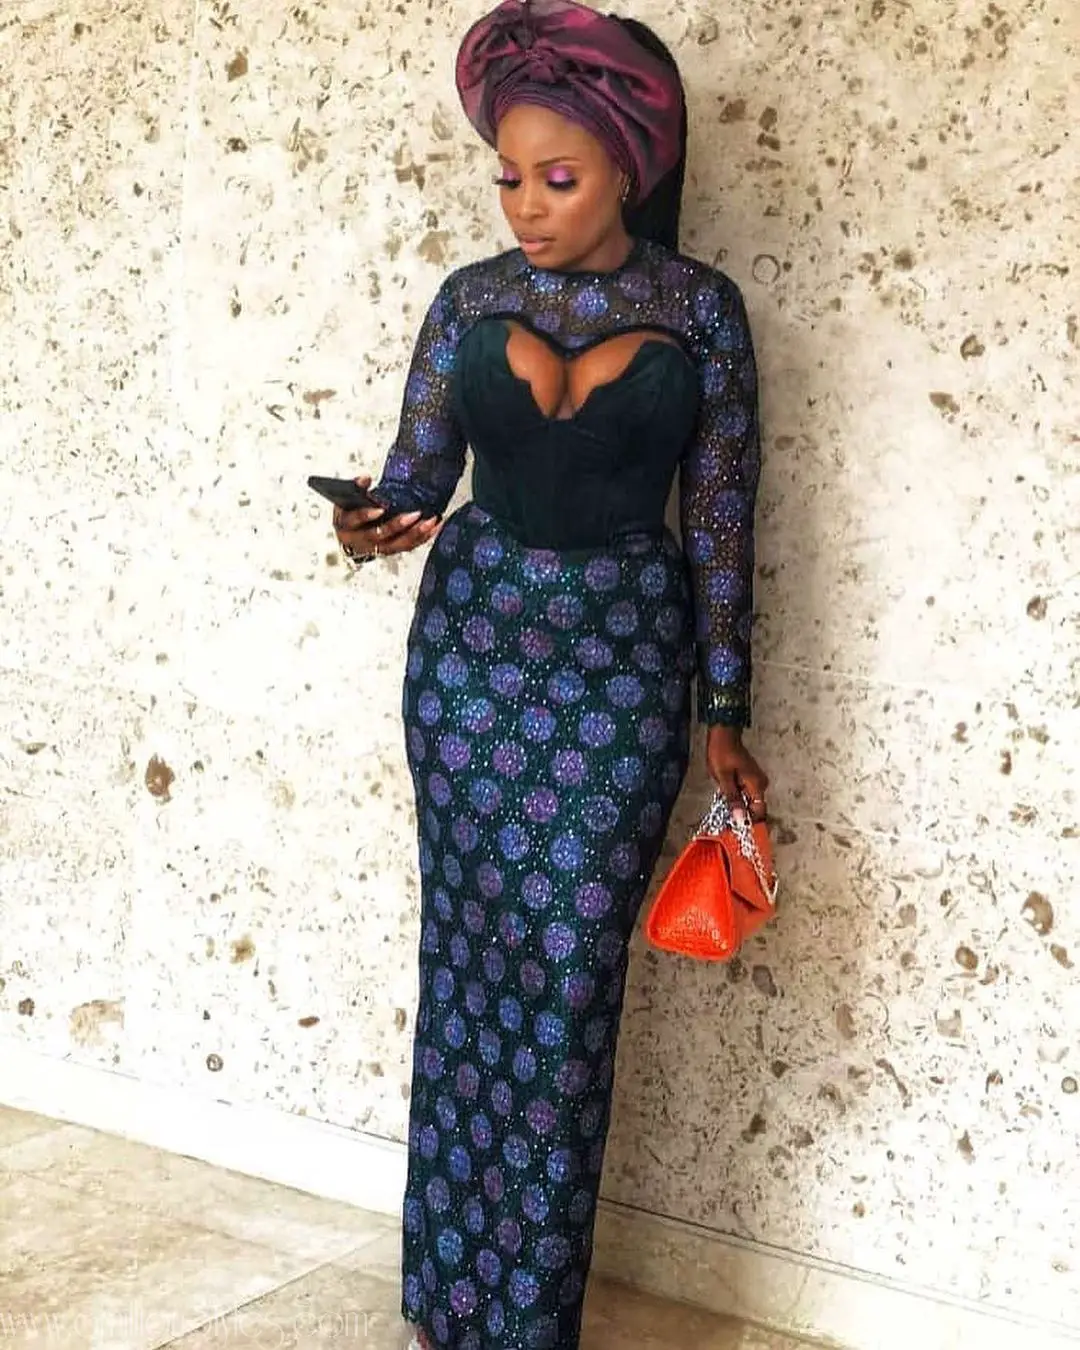 Thought Corset Lace Asoebi Styles Were Out Of The Game? Think Again!